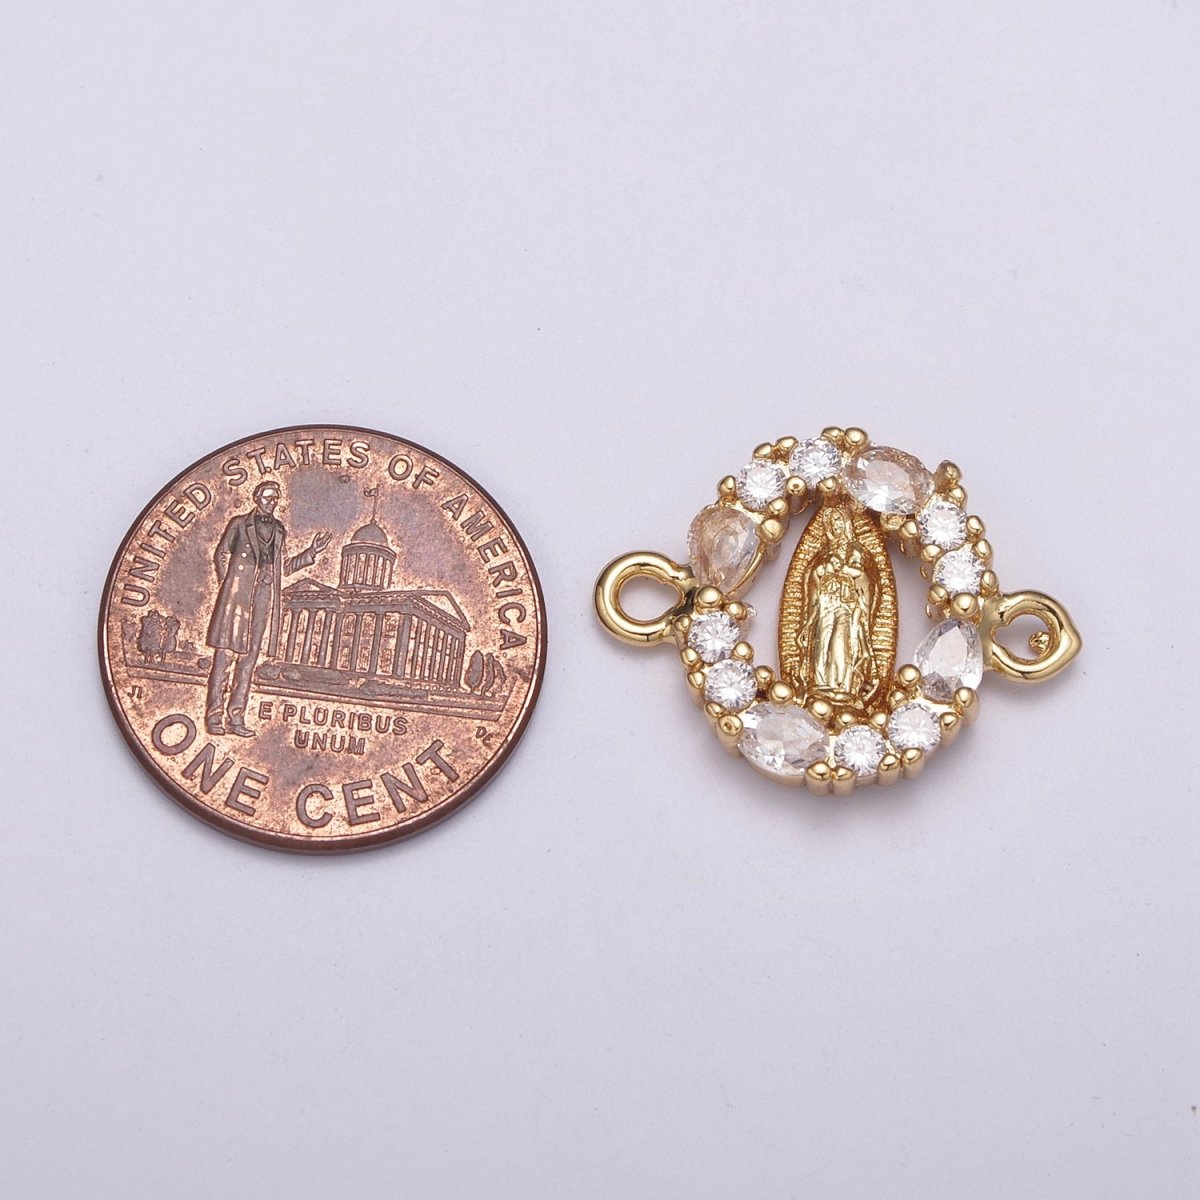 Mini Gold Lady Guadalupe Charm Link Connector for Bracelet Necklace Supply Component F-072 - DLUXCA